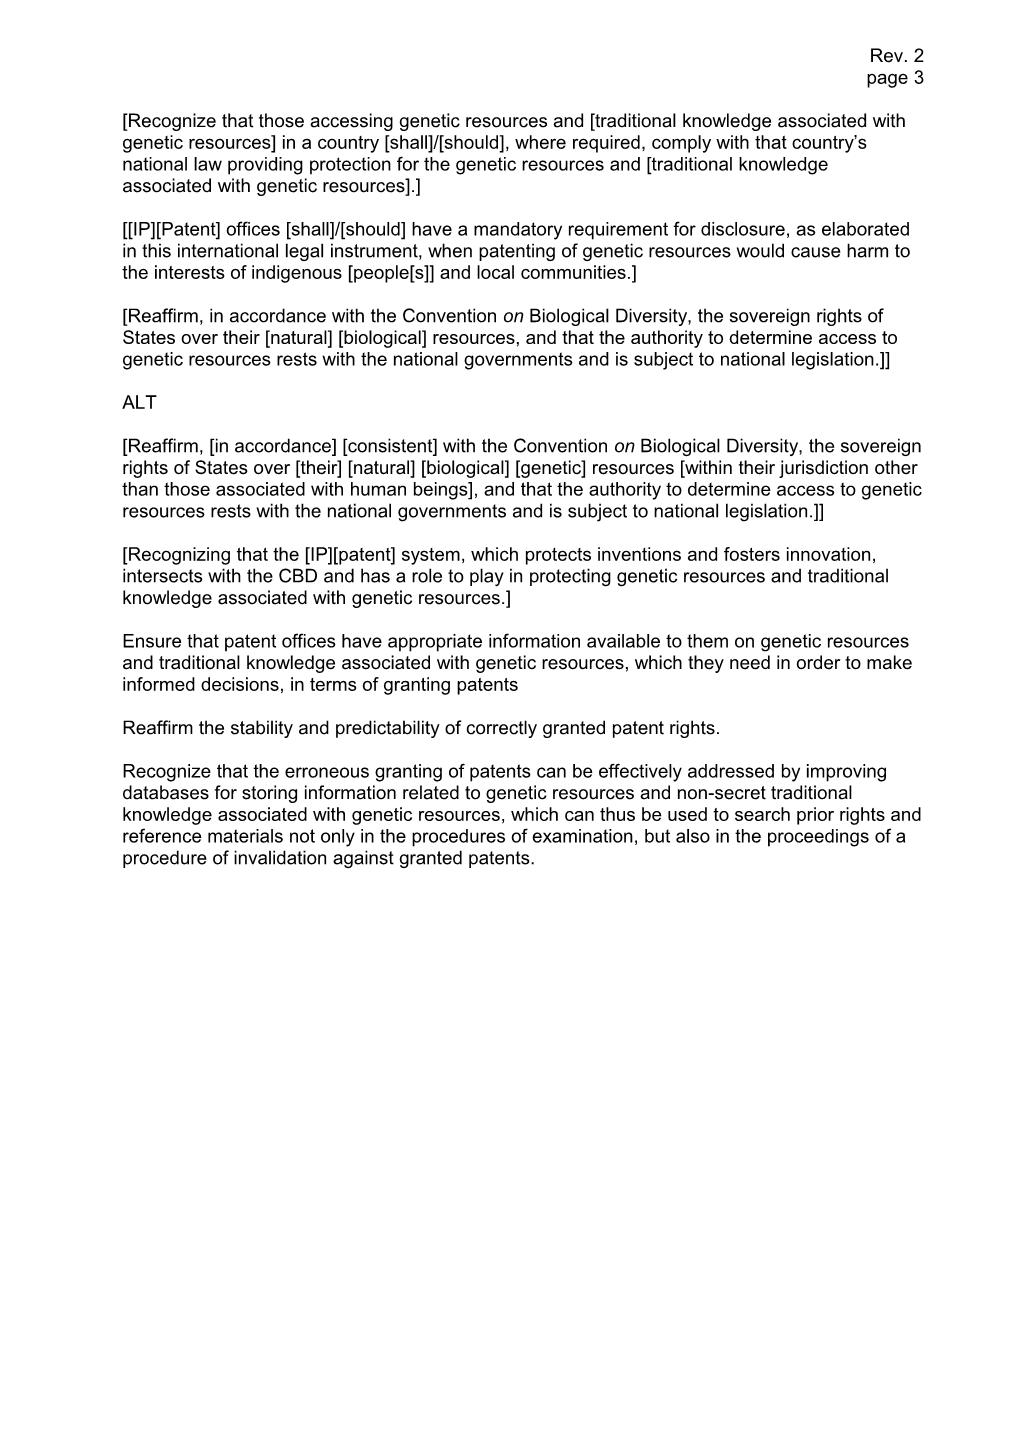 The Consolidated Document Relating to Intellectual Property and Genetic Resources REV